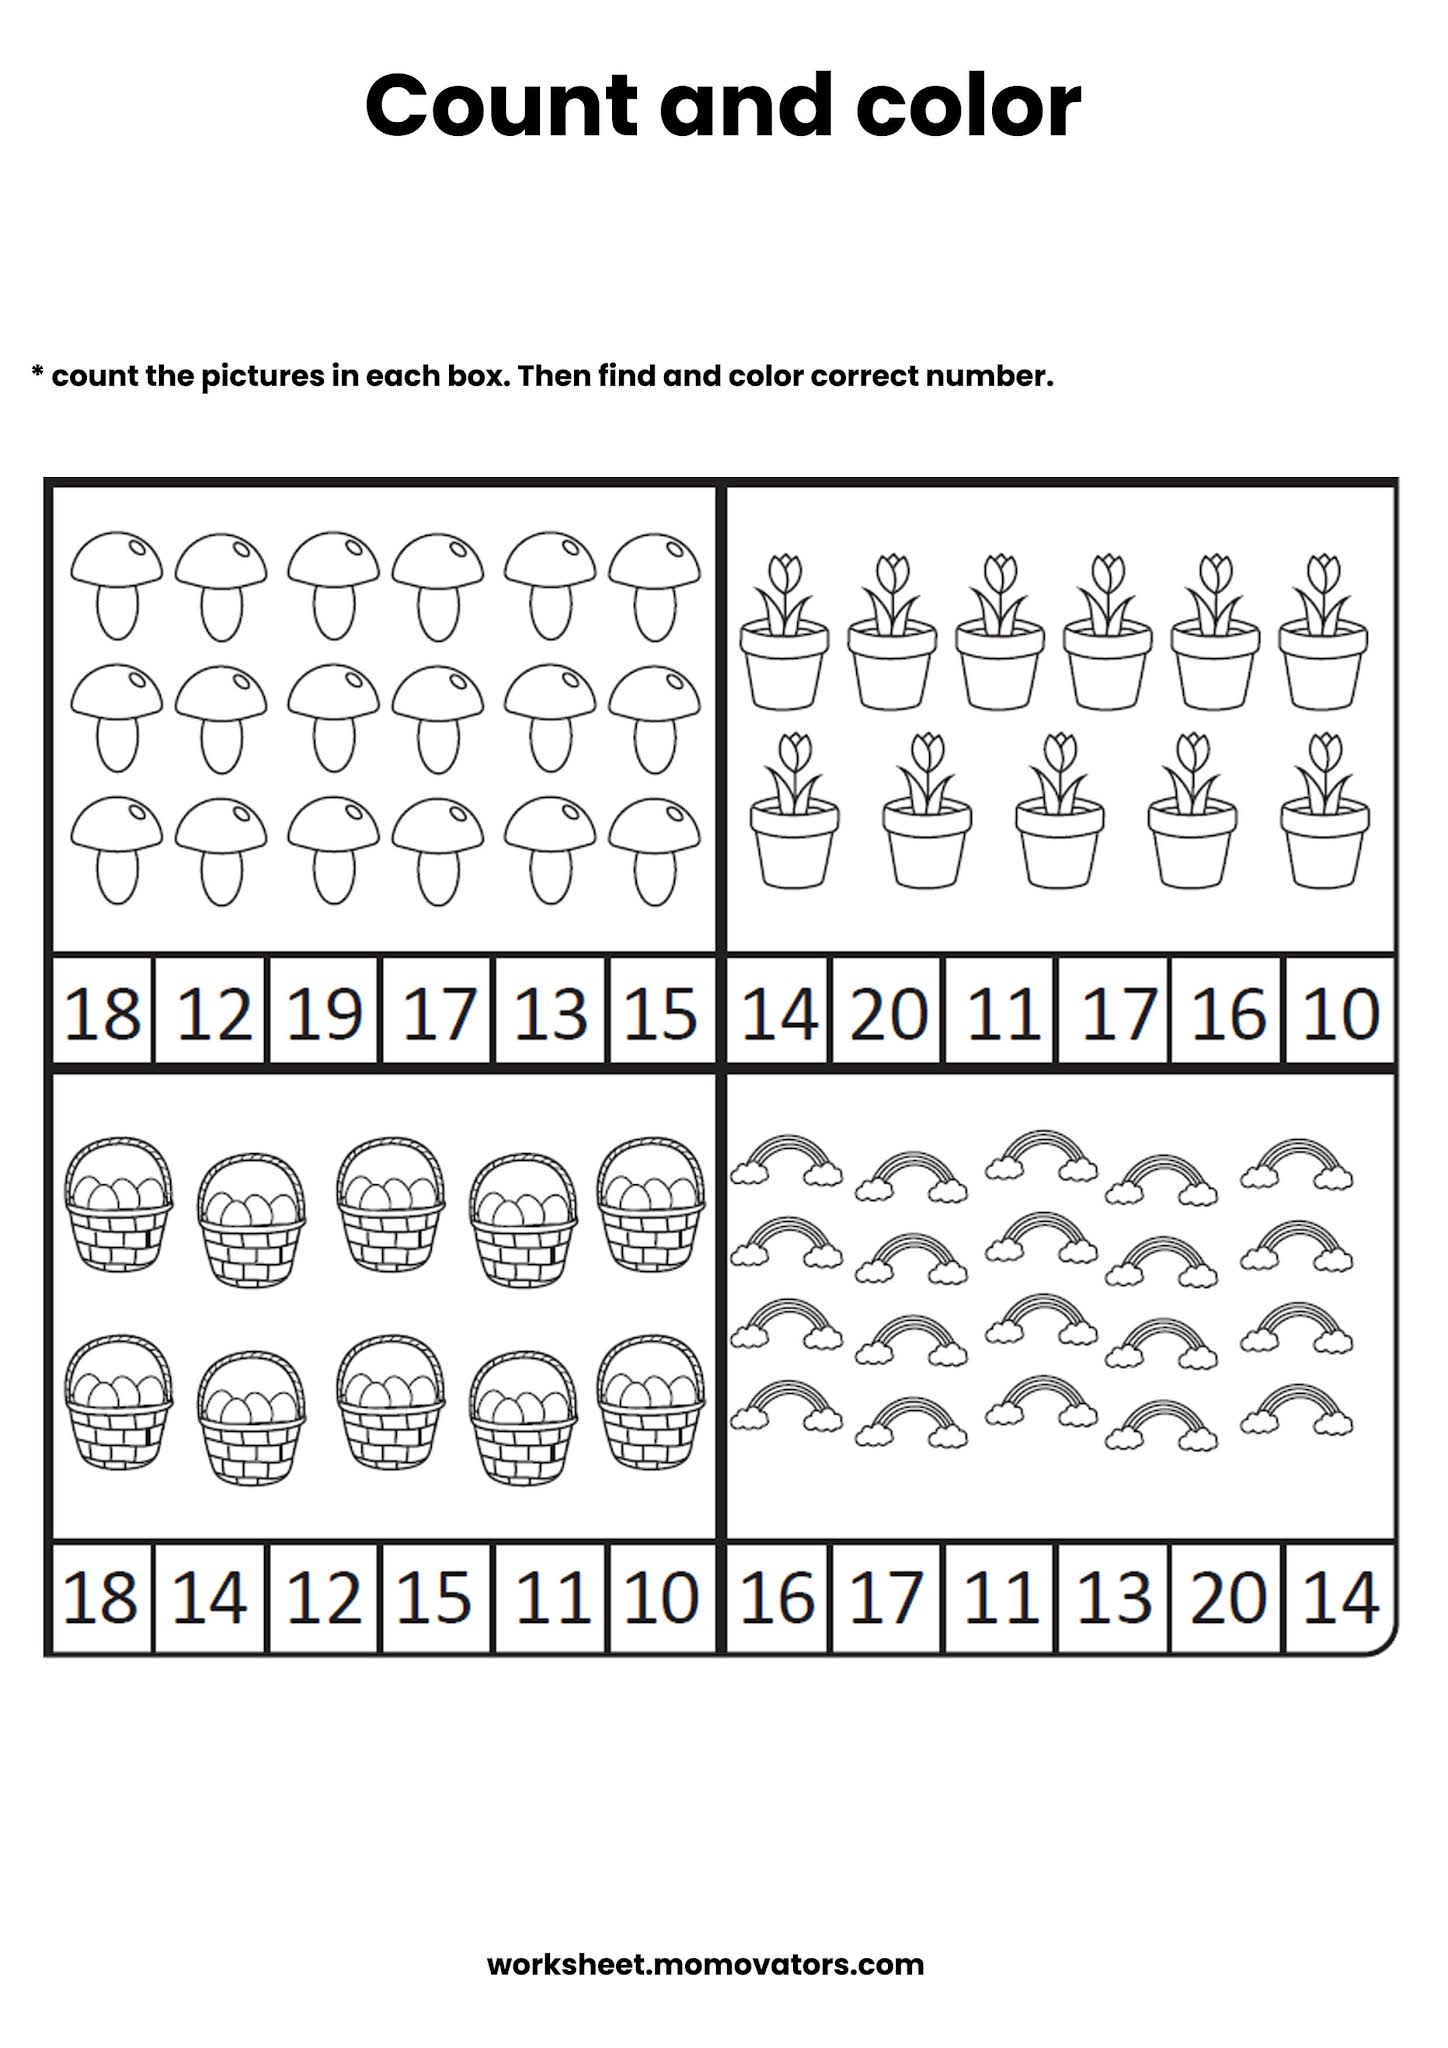 count-and-color-1-20-worksheets-free-printable-worksheets-pdf